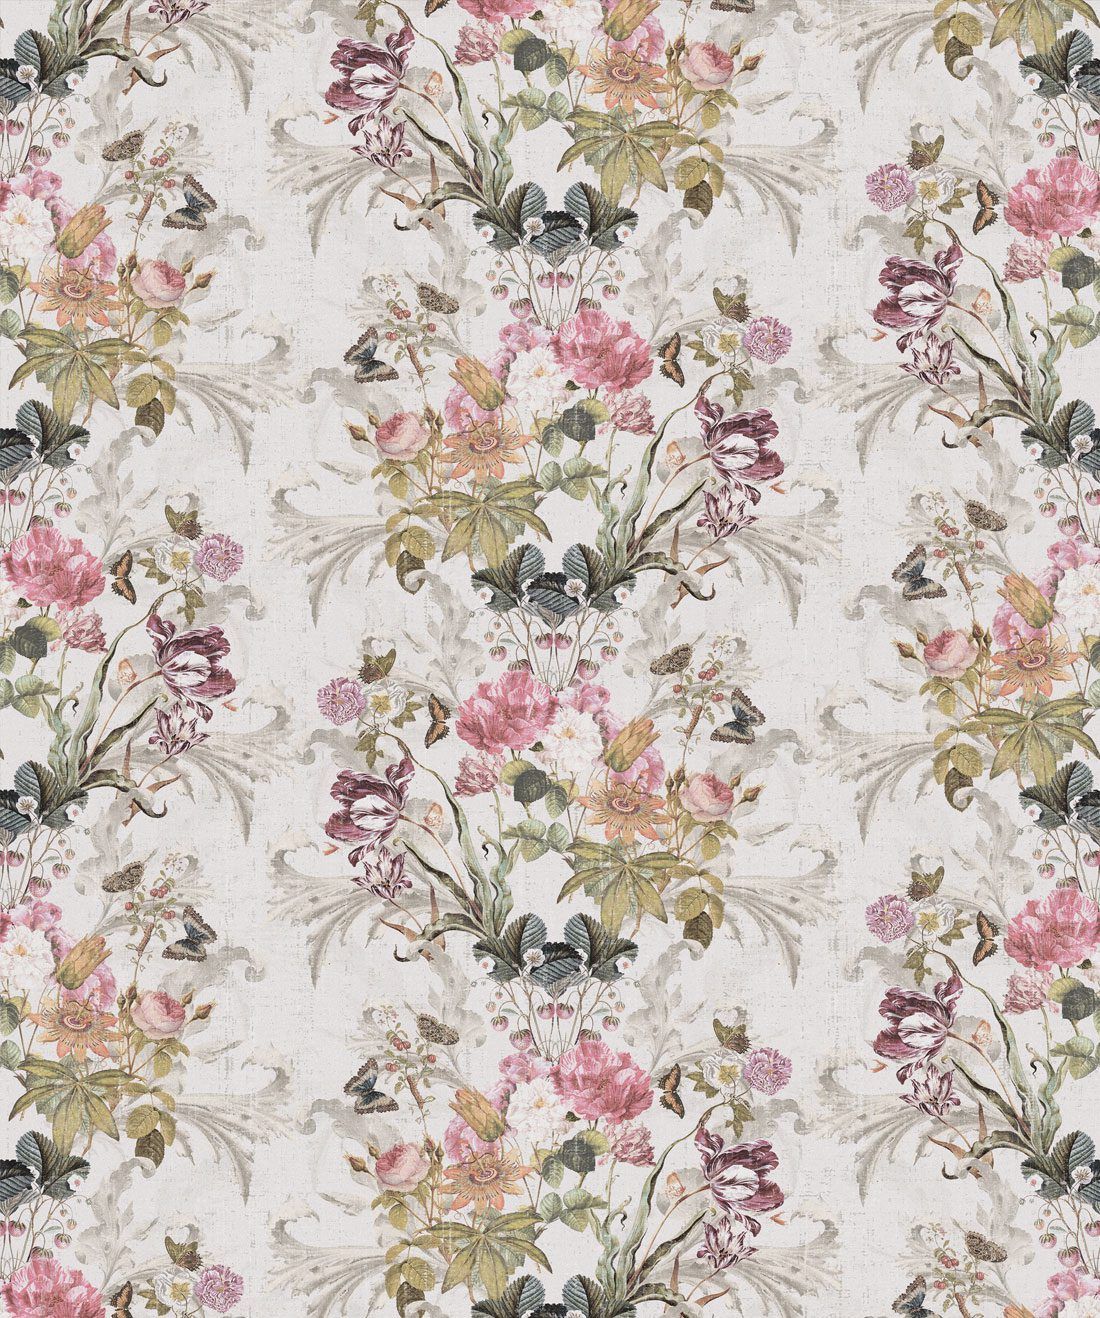 Efflorescence in Gold is a romantic floral wallpaper